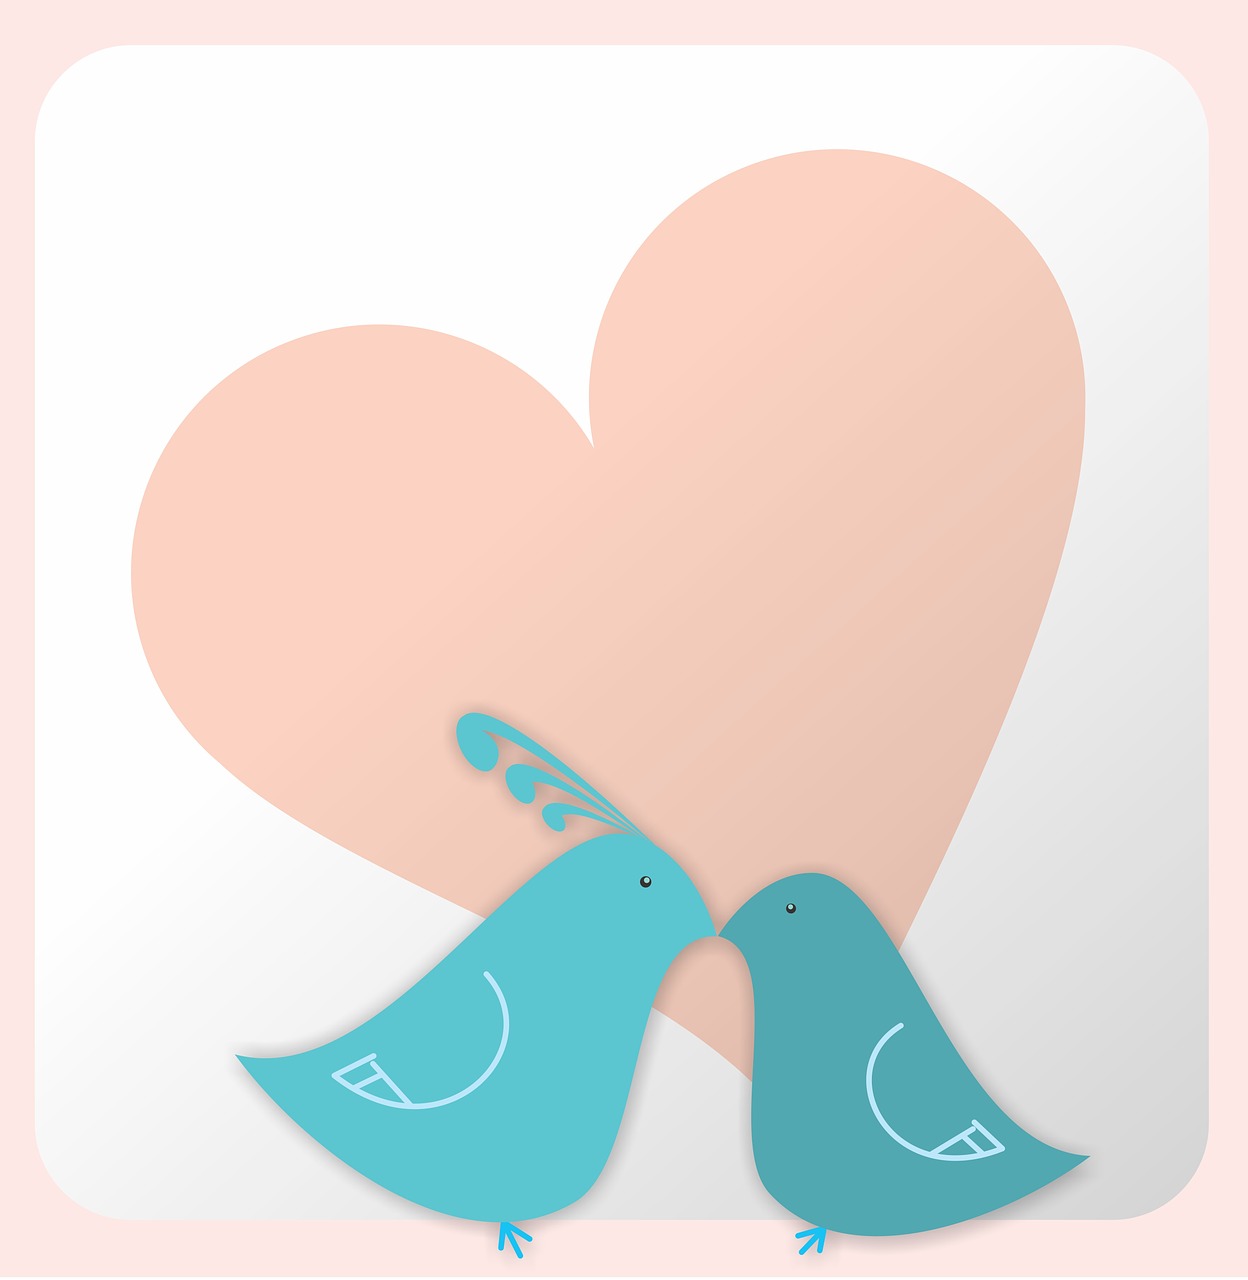 a couple of birds standing next to each other in front of a heart, an illustration of, pastel tone, kissing together, an illustration, marketing photo